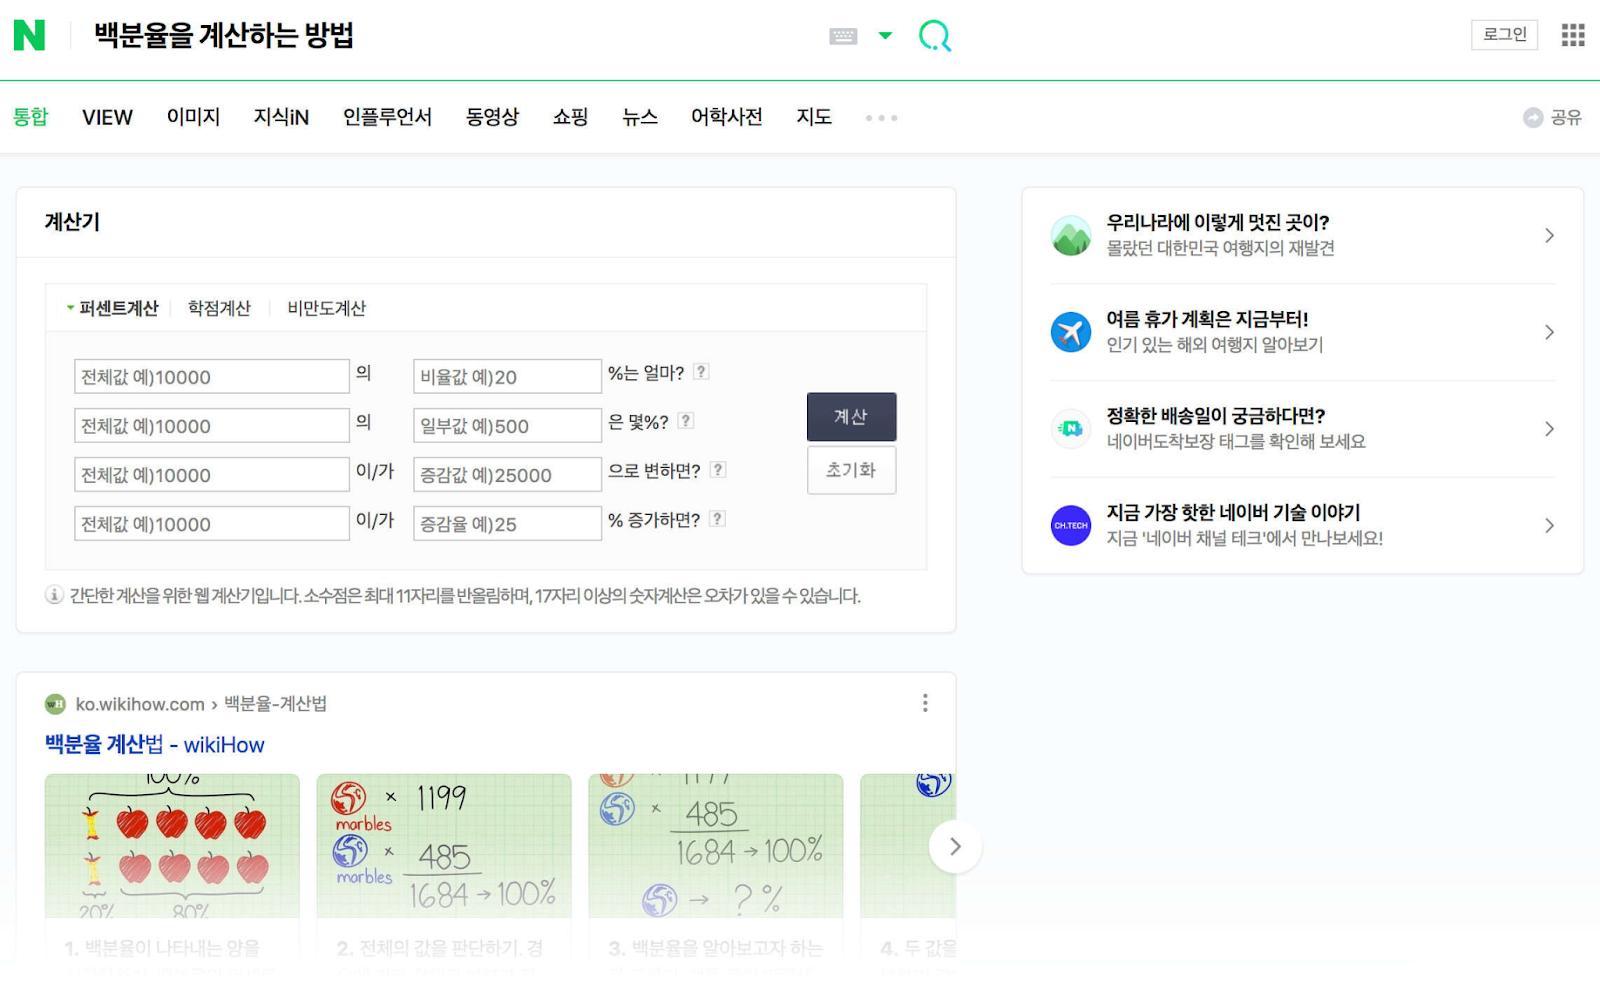 Naver’s search engine